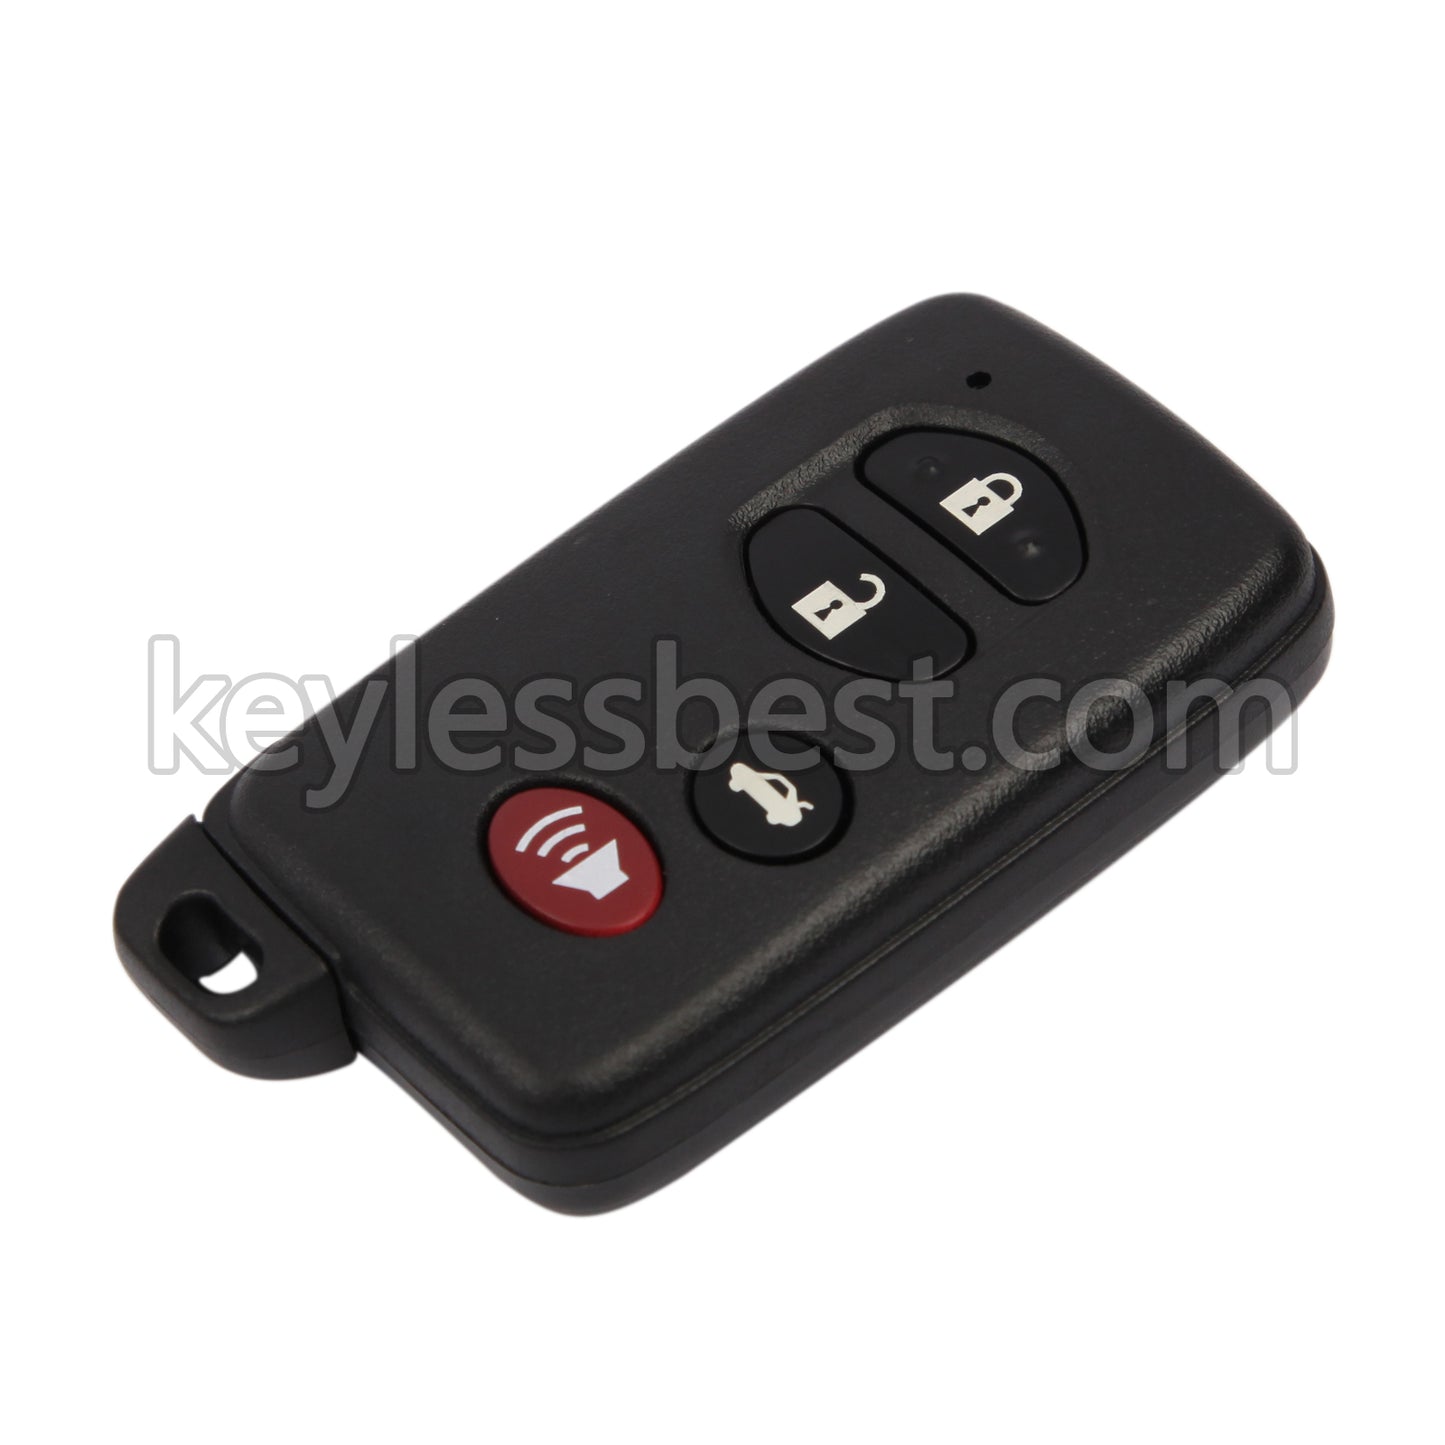 2009 - 2014 Toyota Avalon Camry Corolla / 4 Buttons Remote Key / HYQ14AEM / 315MHz